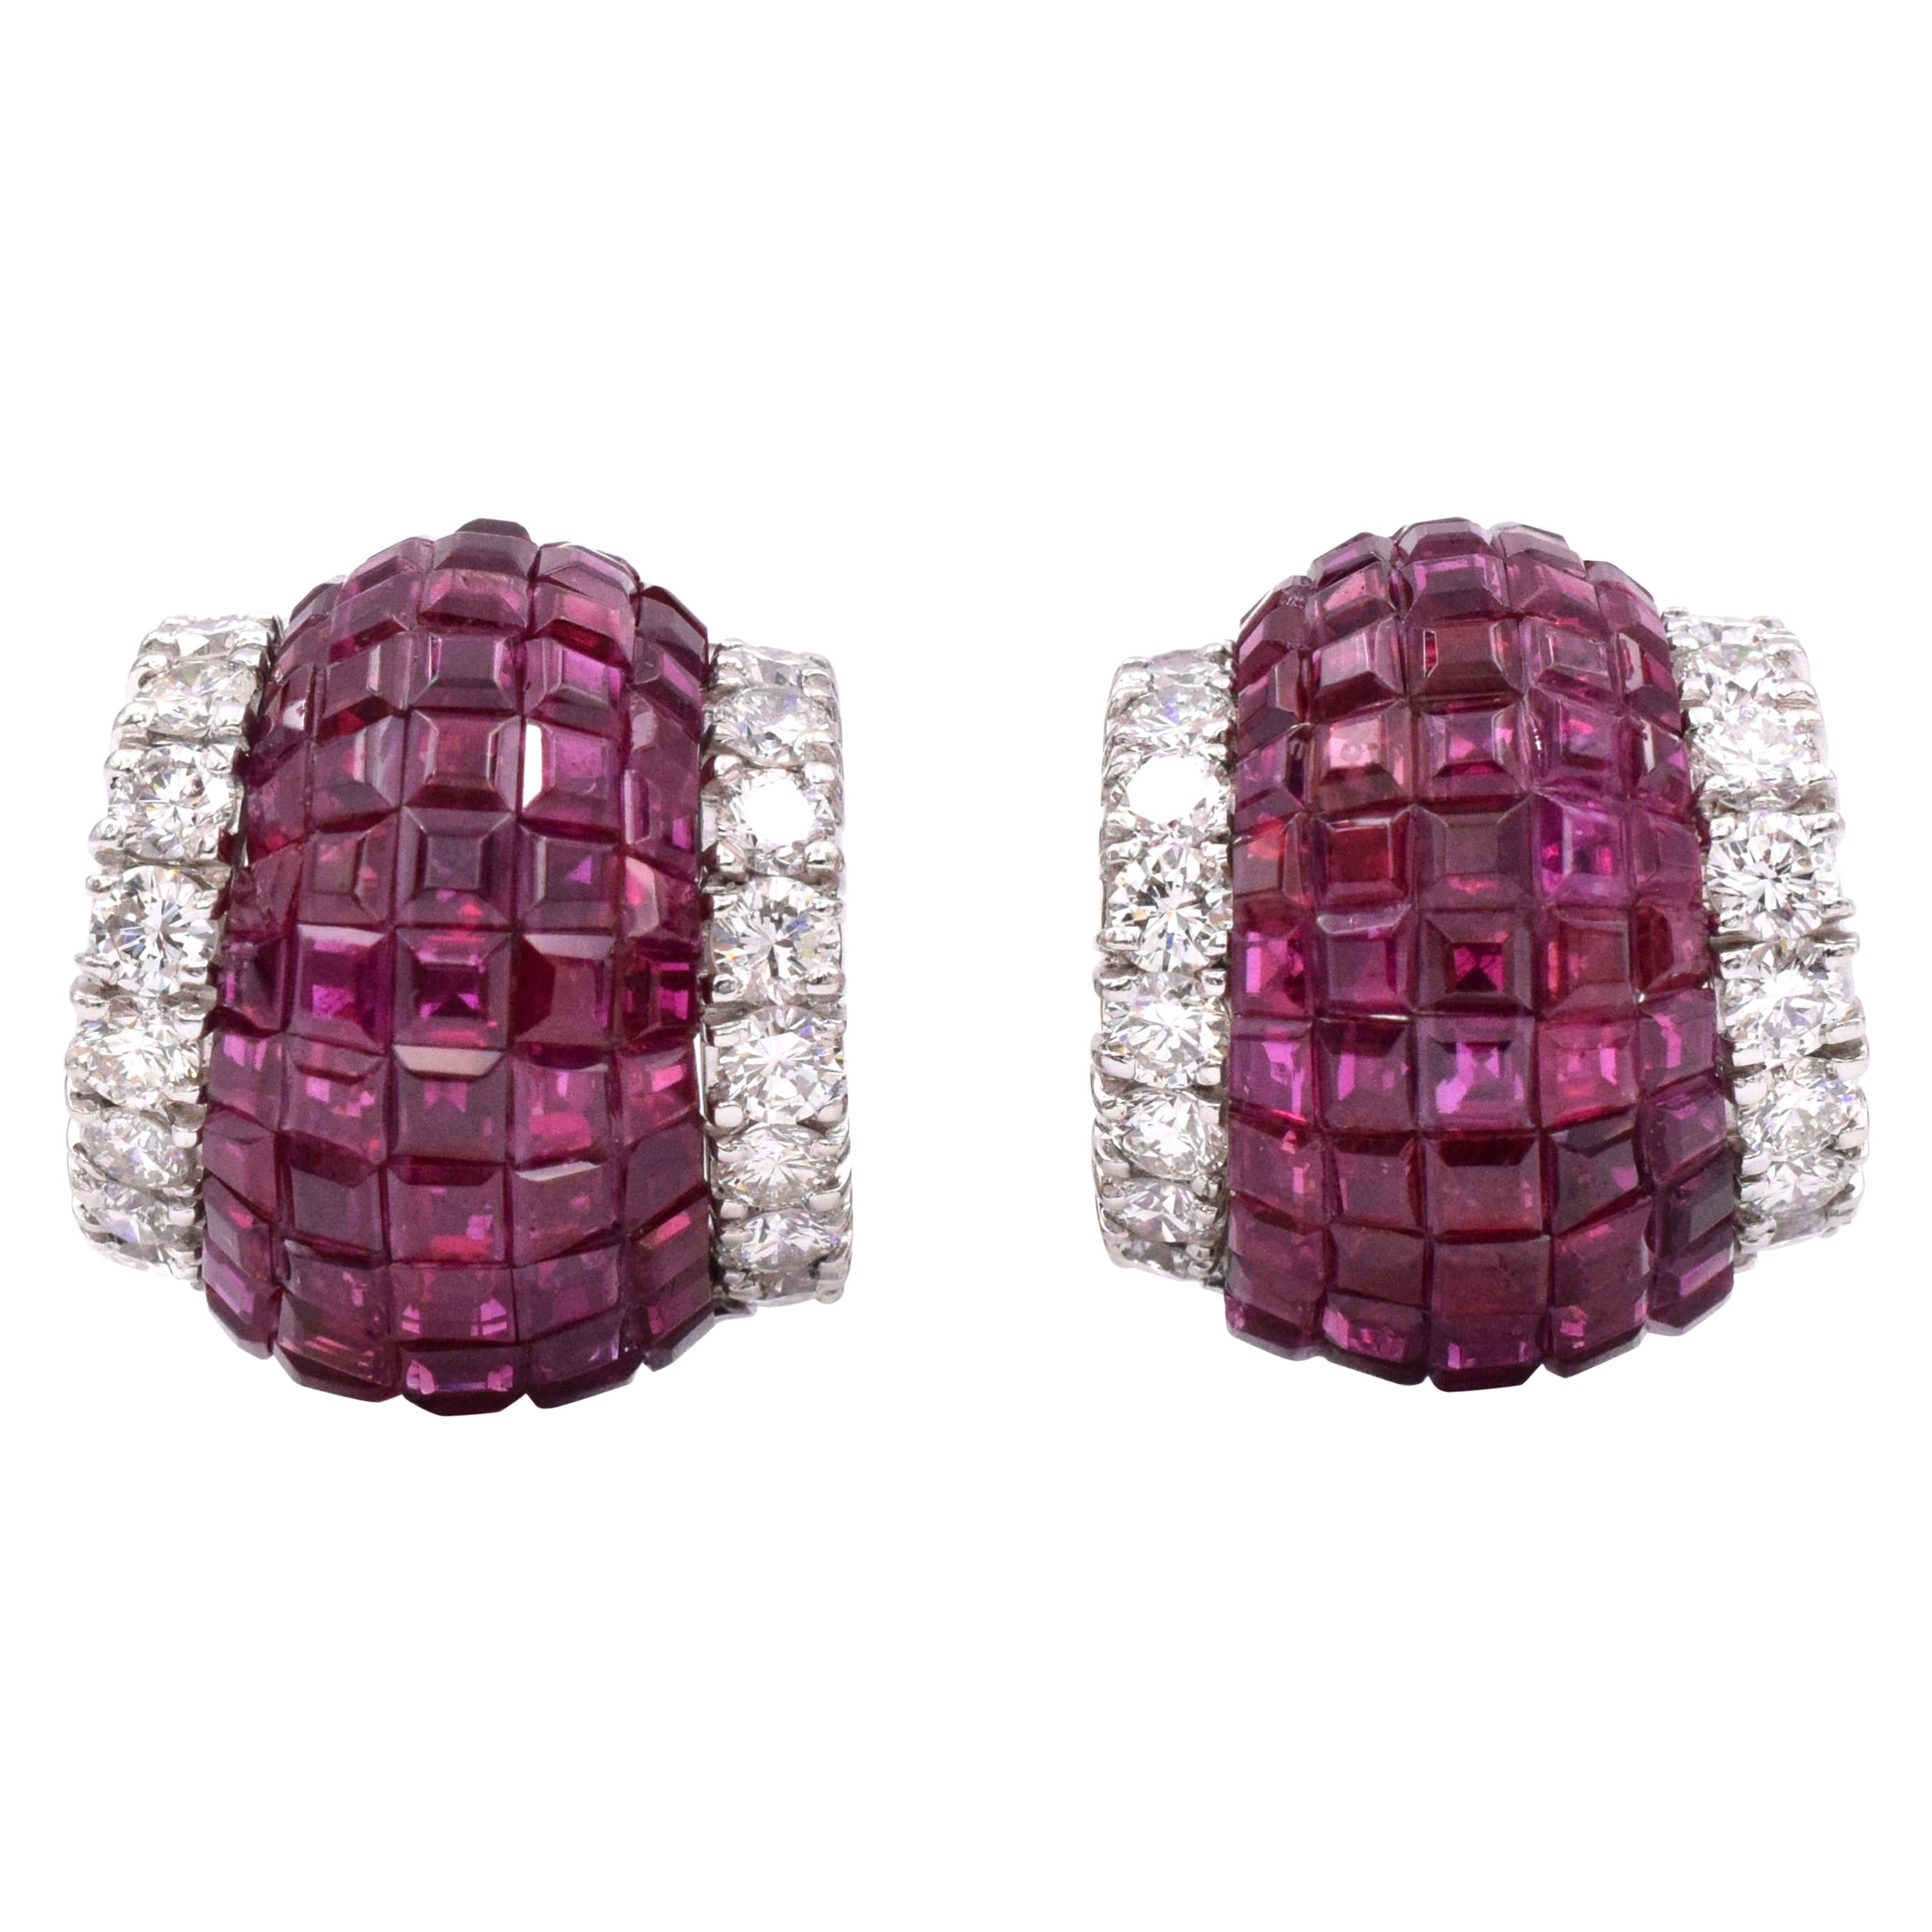 Invisibly-Set Ruby and Diamond Earclips by Aletto Brothers